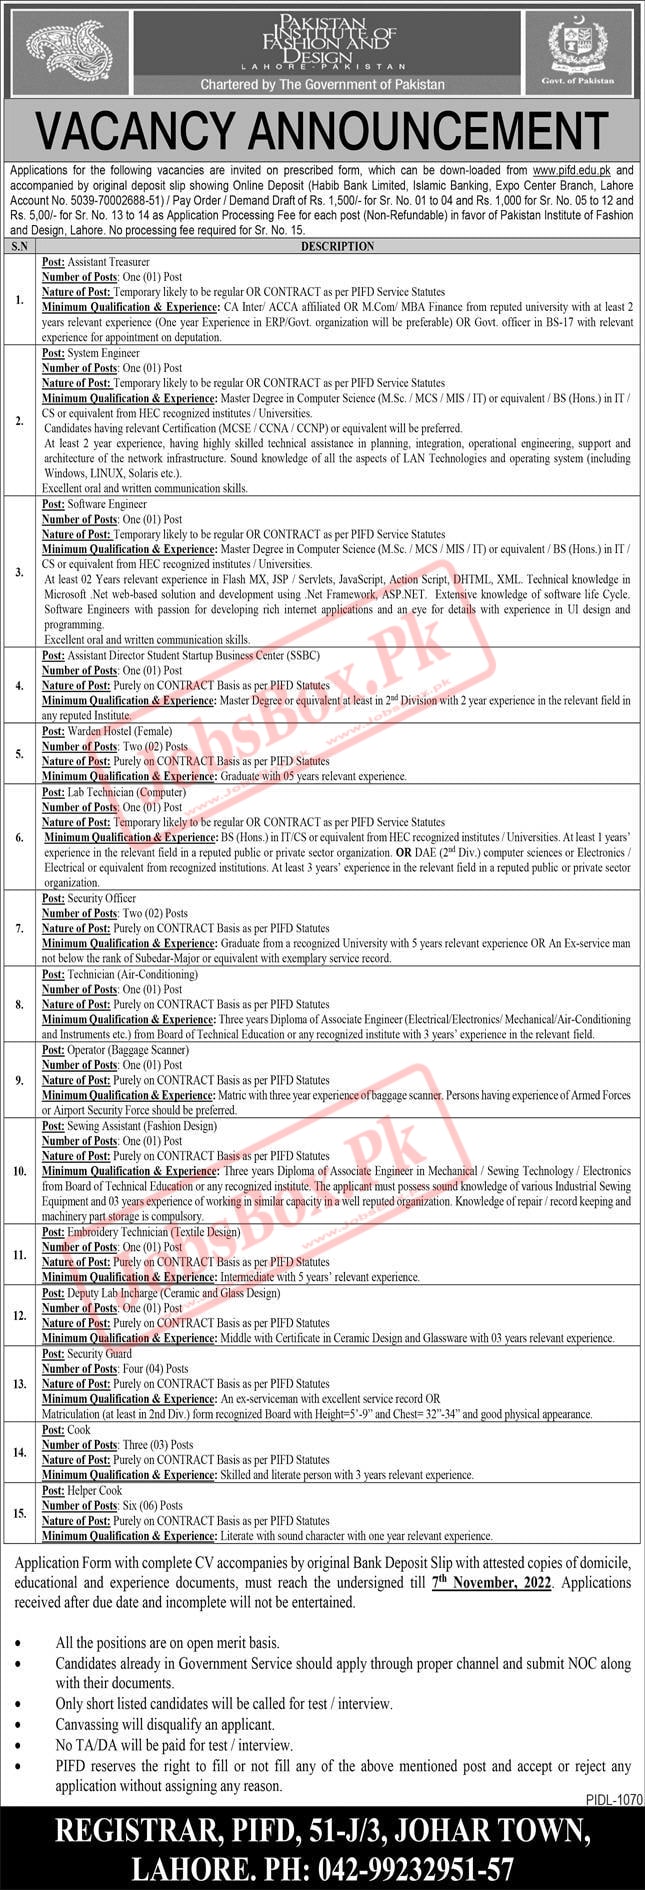 Pakistan Institute of Fashion and Design Jobs 2022 - PIFD Jobs 2022